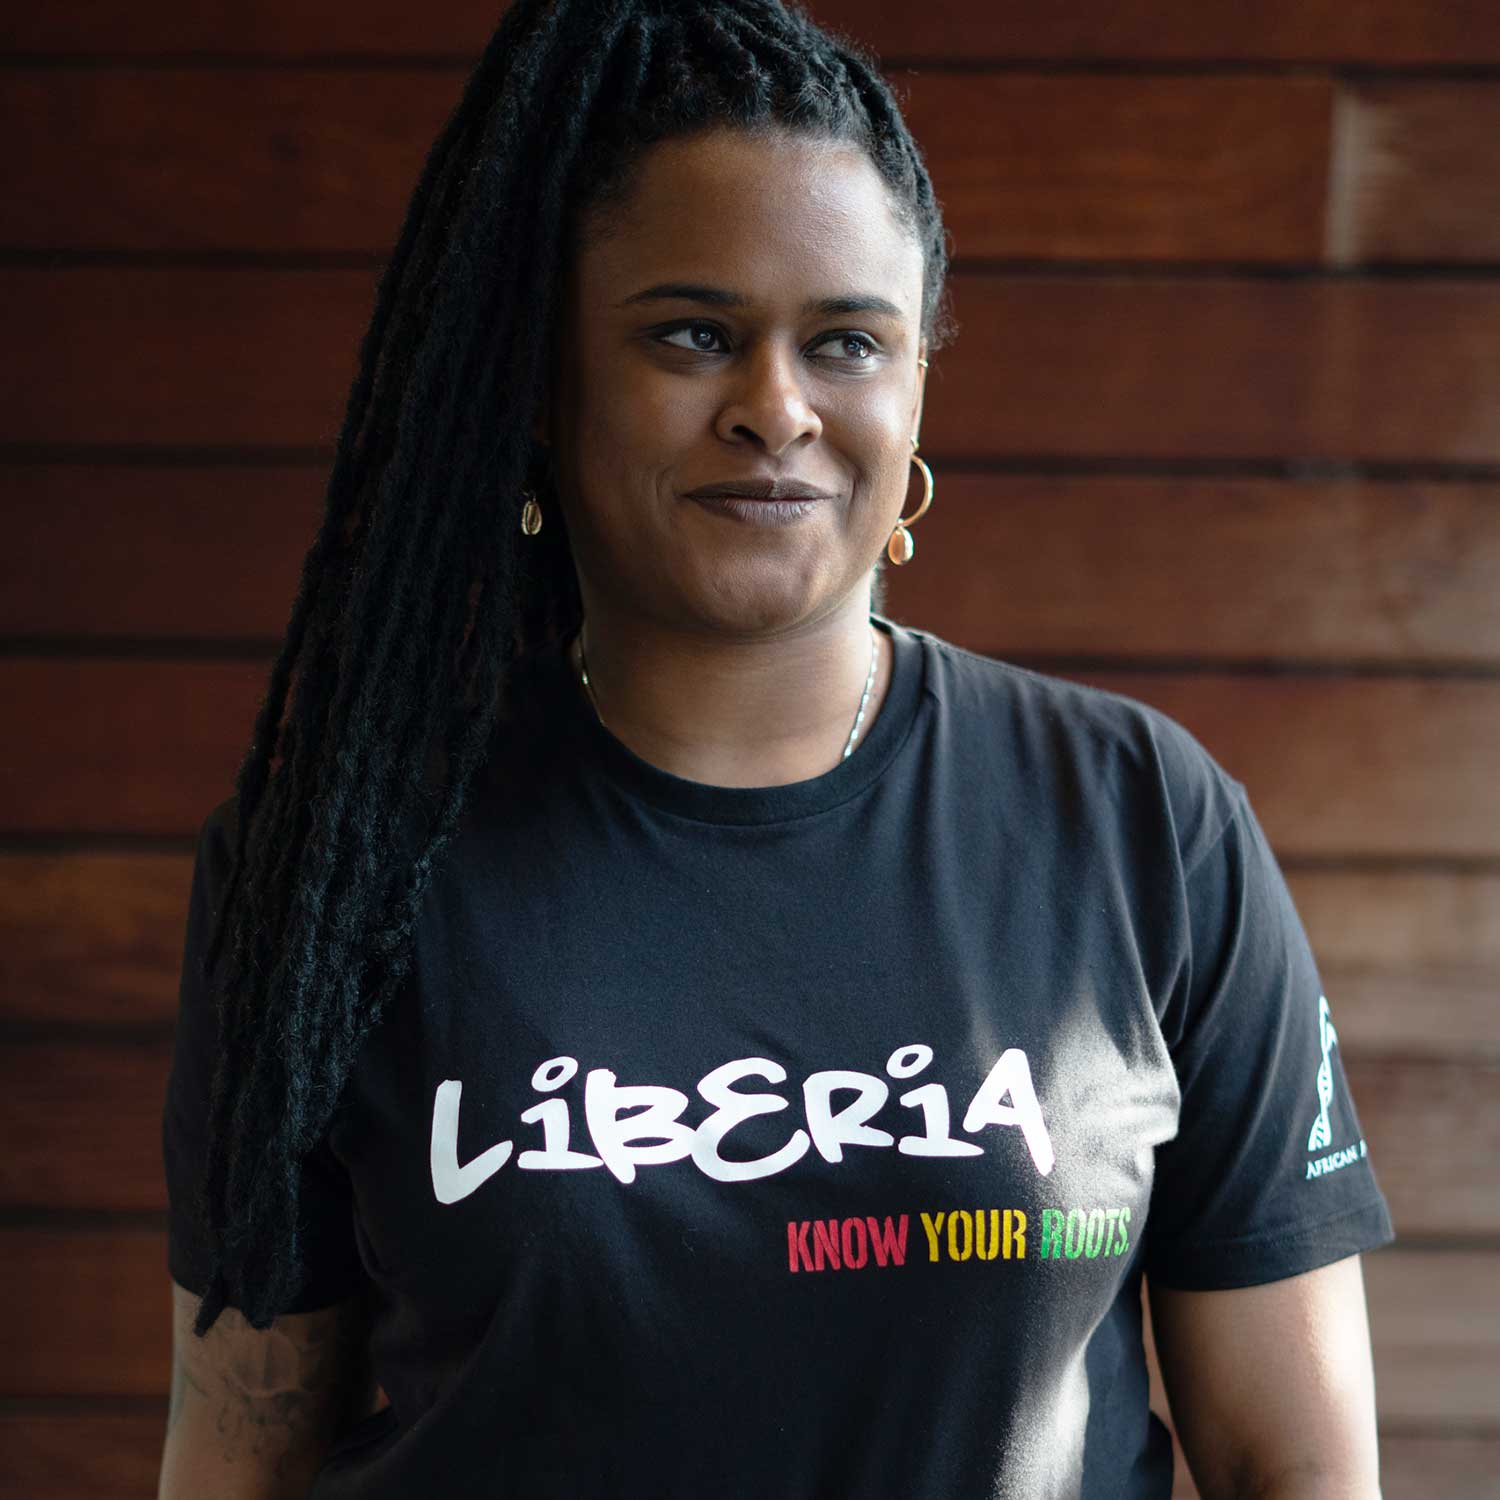 African American woman wearing a black T-shirt with "Liberia" written in white and "Know your roots" written in African colors